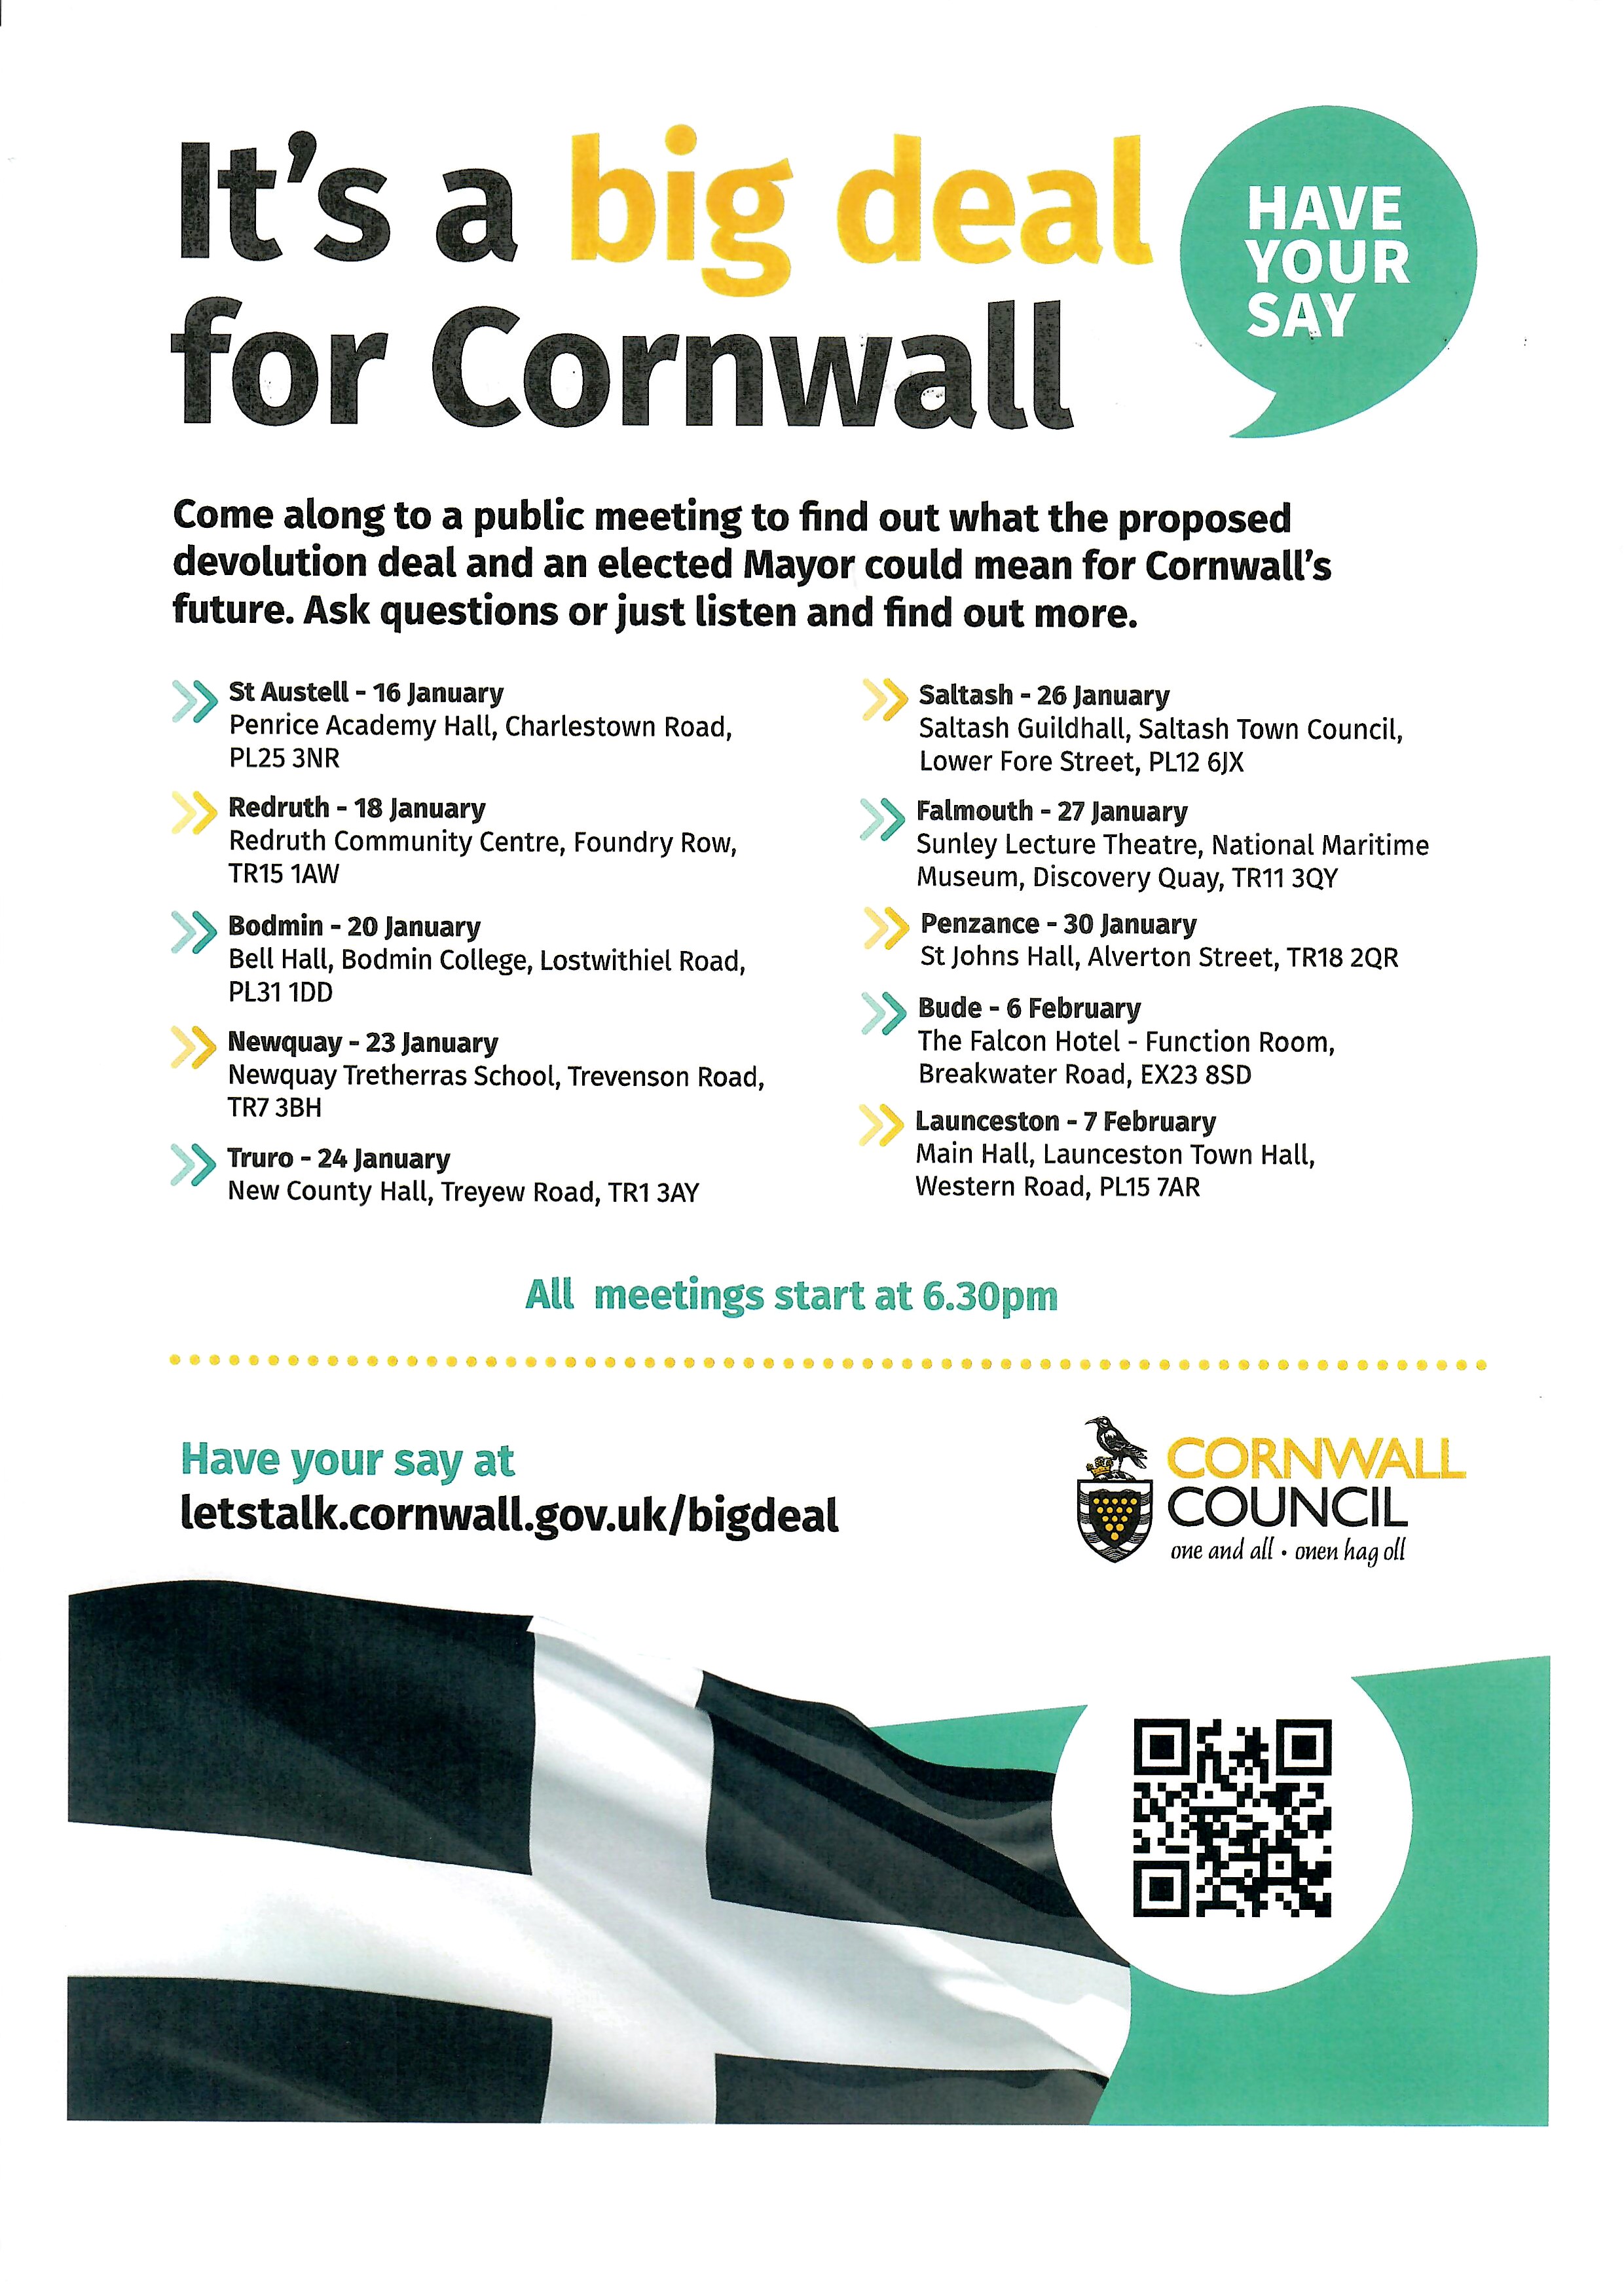 Dates of public meetings to hear more about Cornwall's Devolution deal